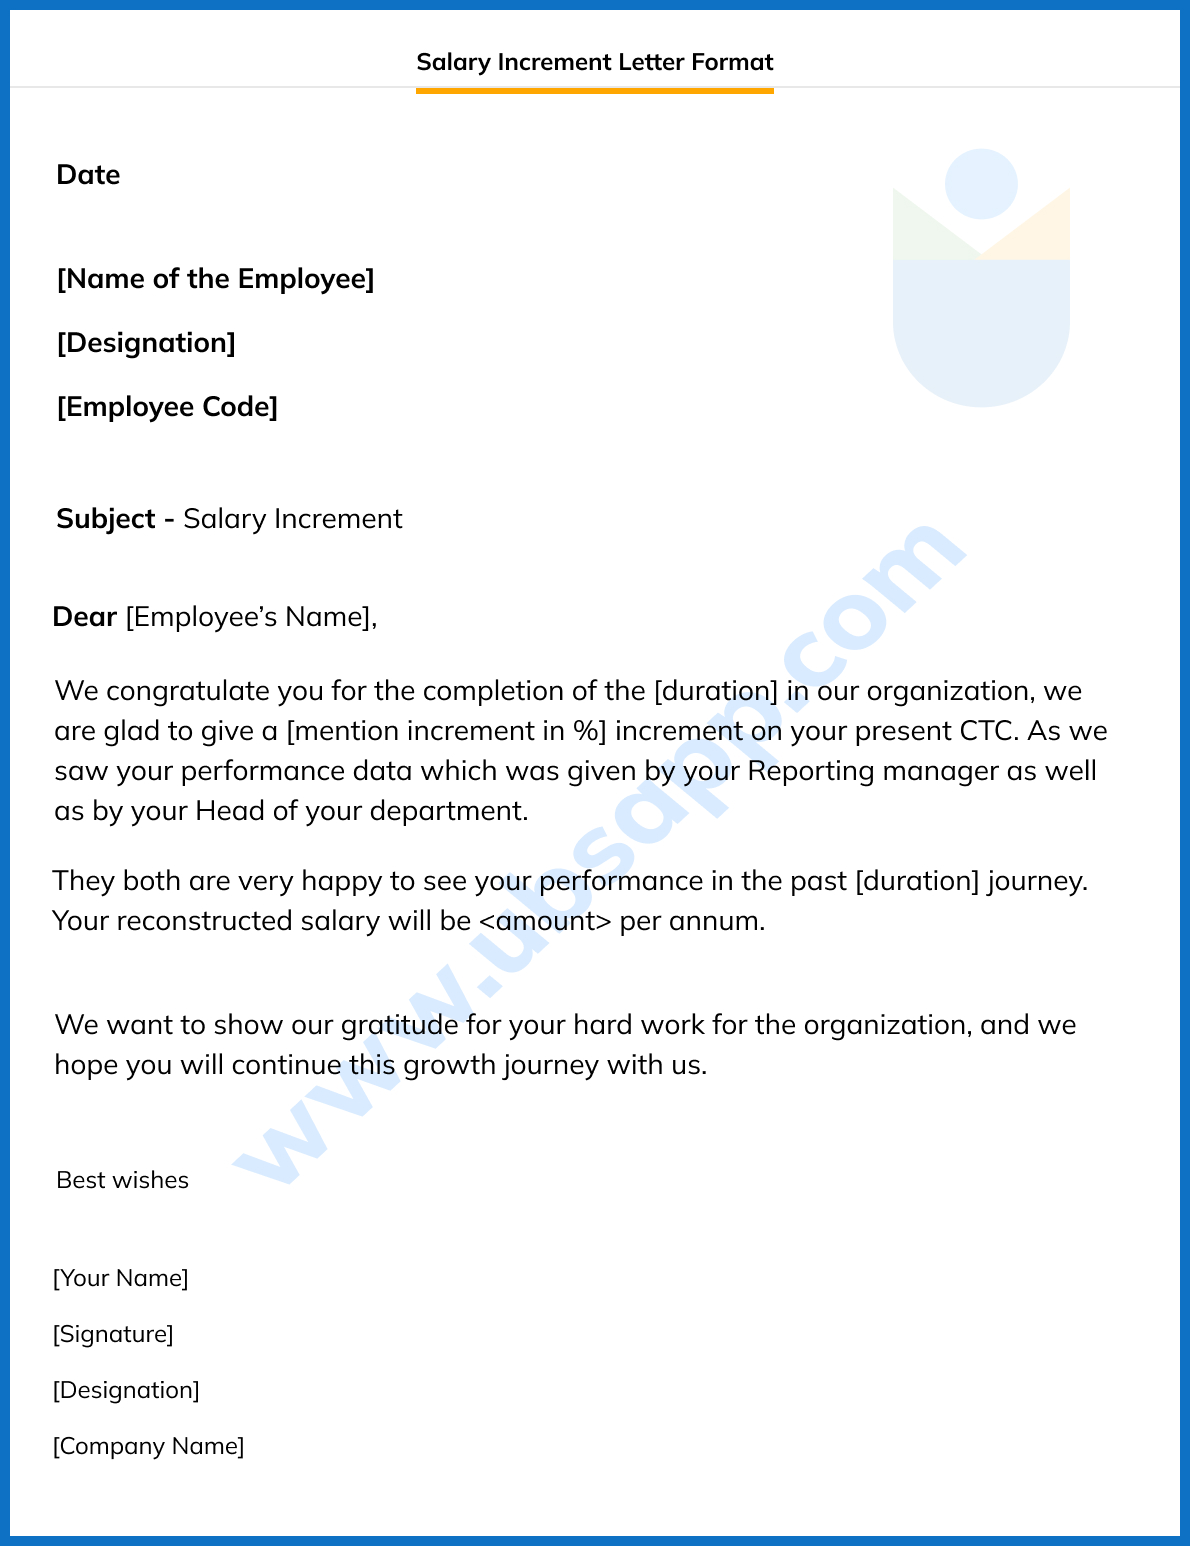 Salary Increment Letter Format